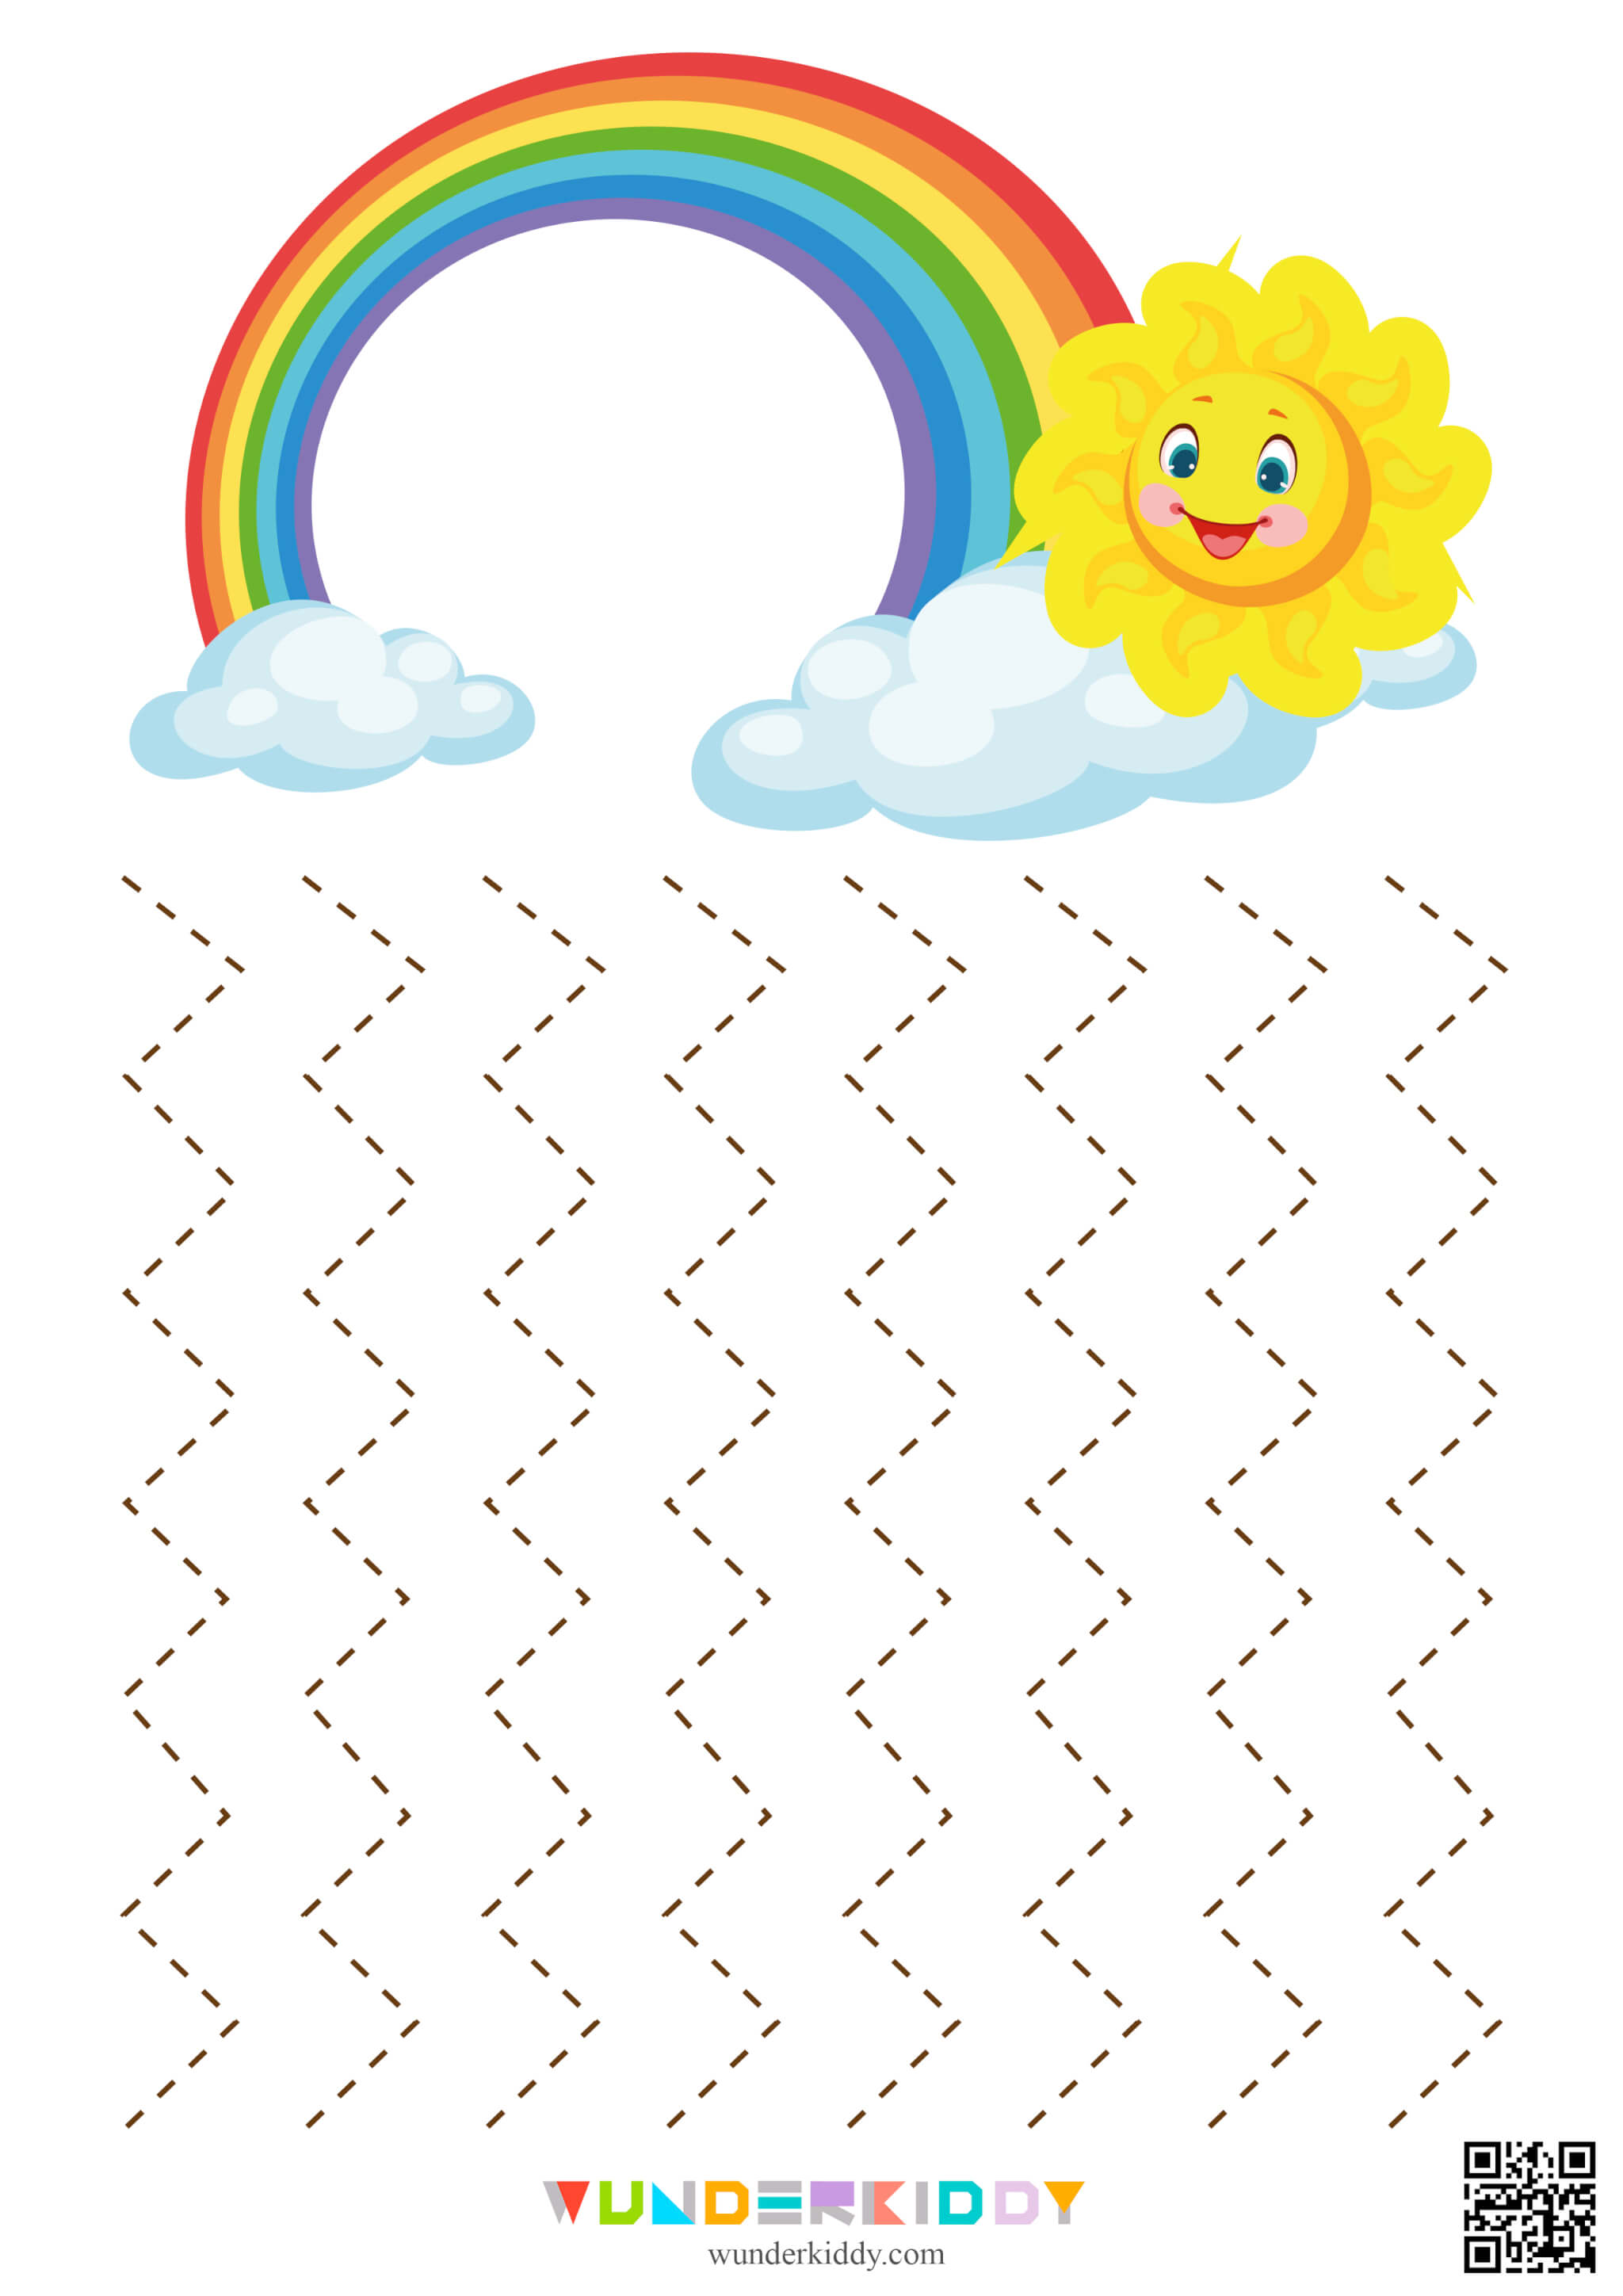 Worksheet for Pre-writing Practice Sun and Rainbow - Image 6